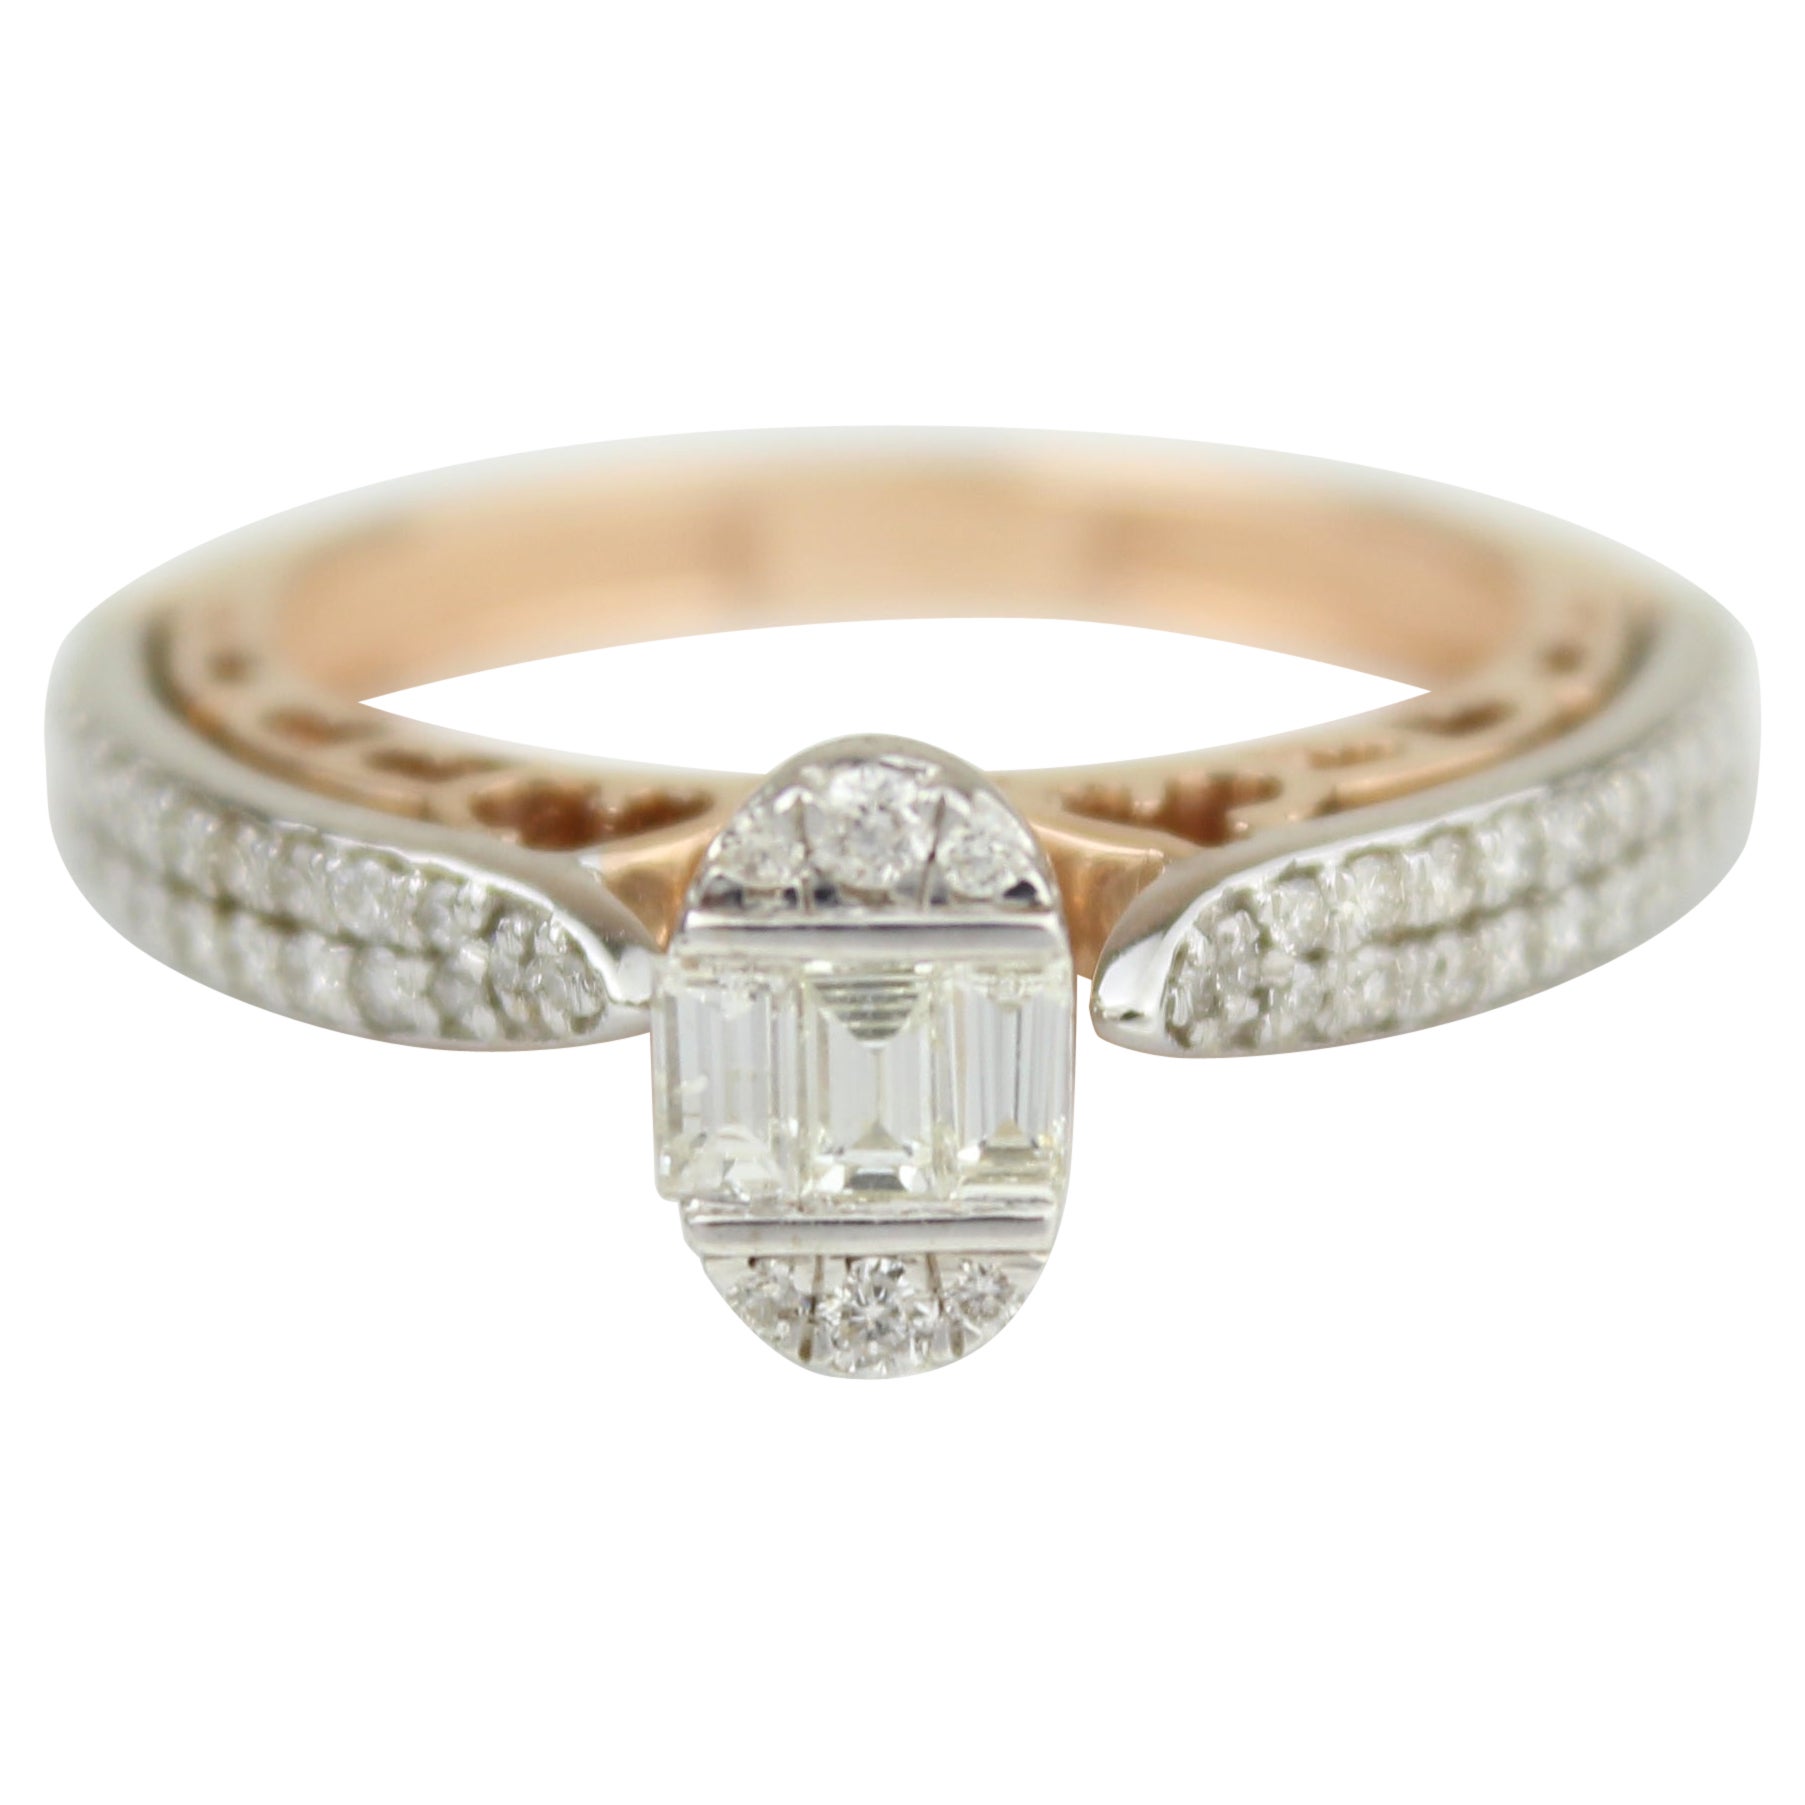 For Sale:  Oval Design Diamond Ring With Illusion Setting in 18k Solid Gold